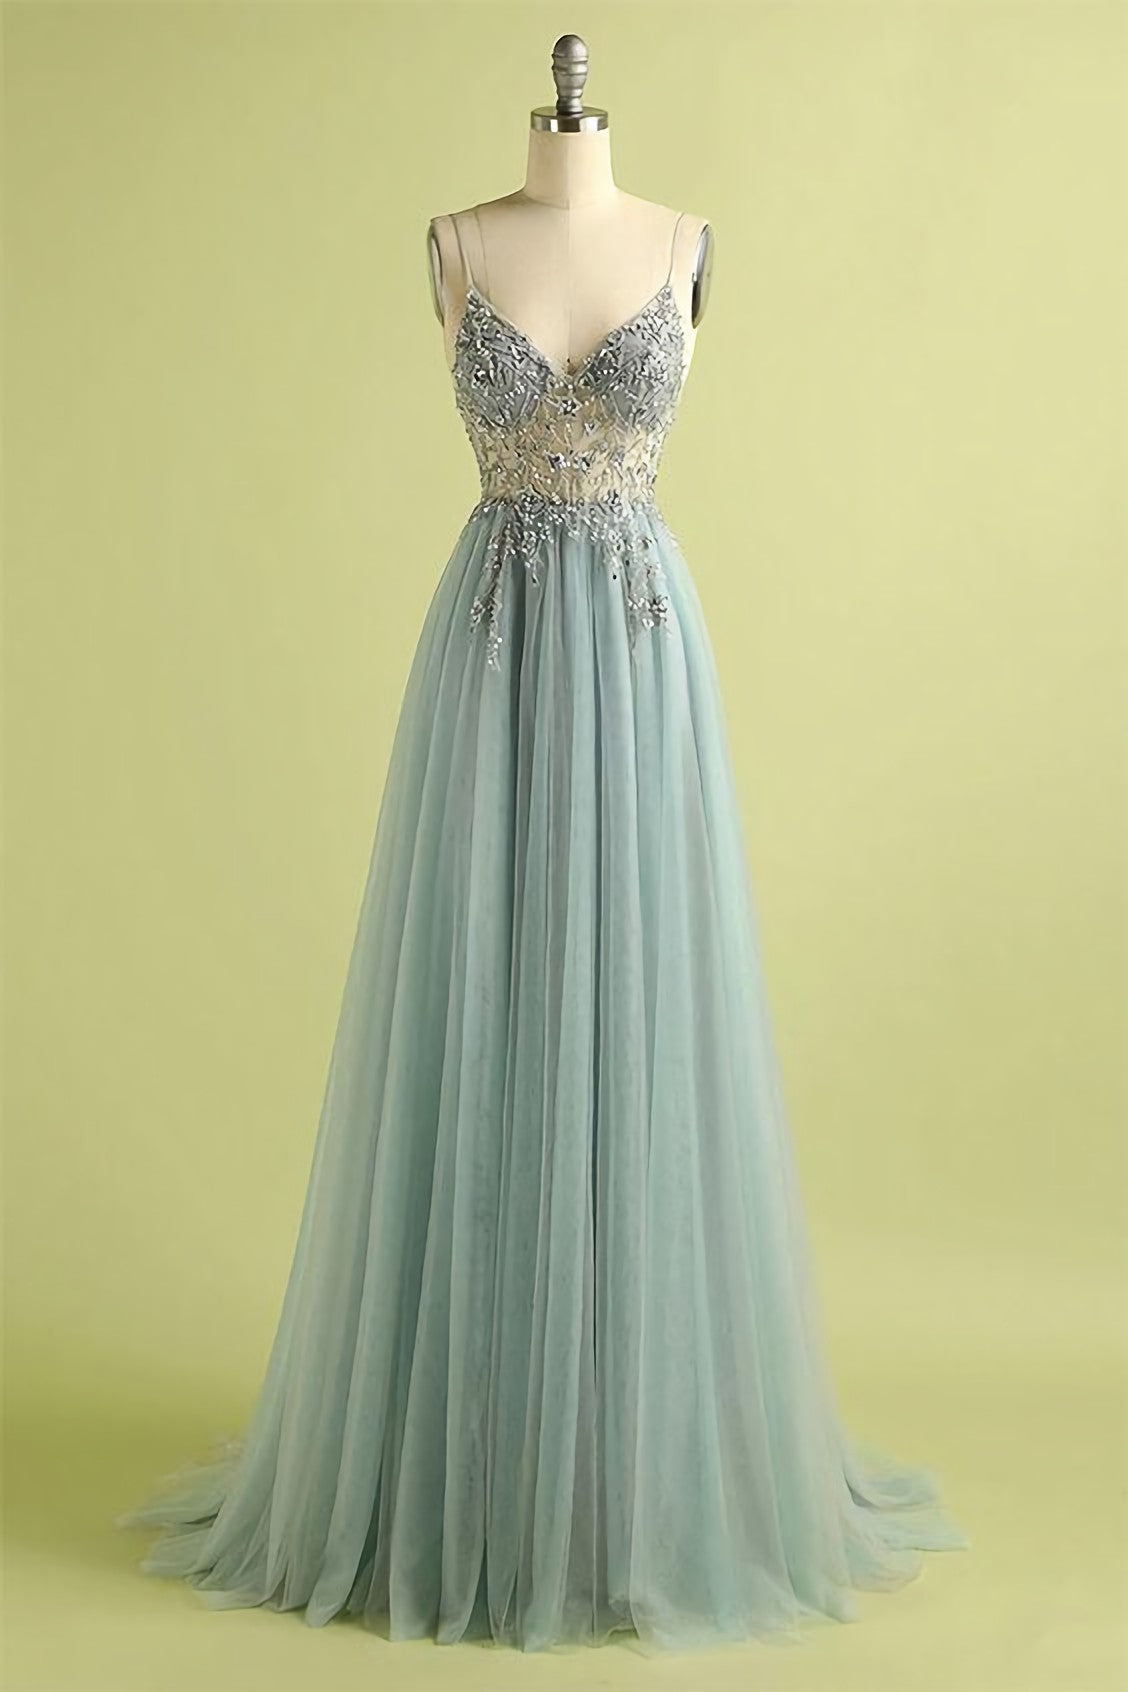 Long Prom Dress, Inspiration Junior Prom Gowns